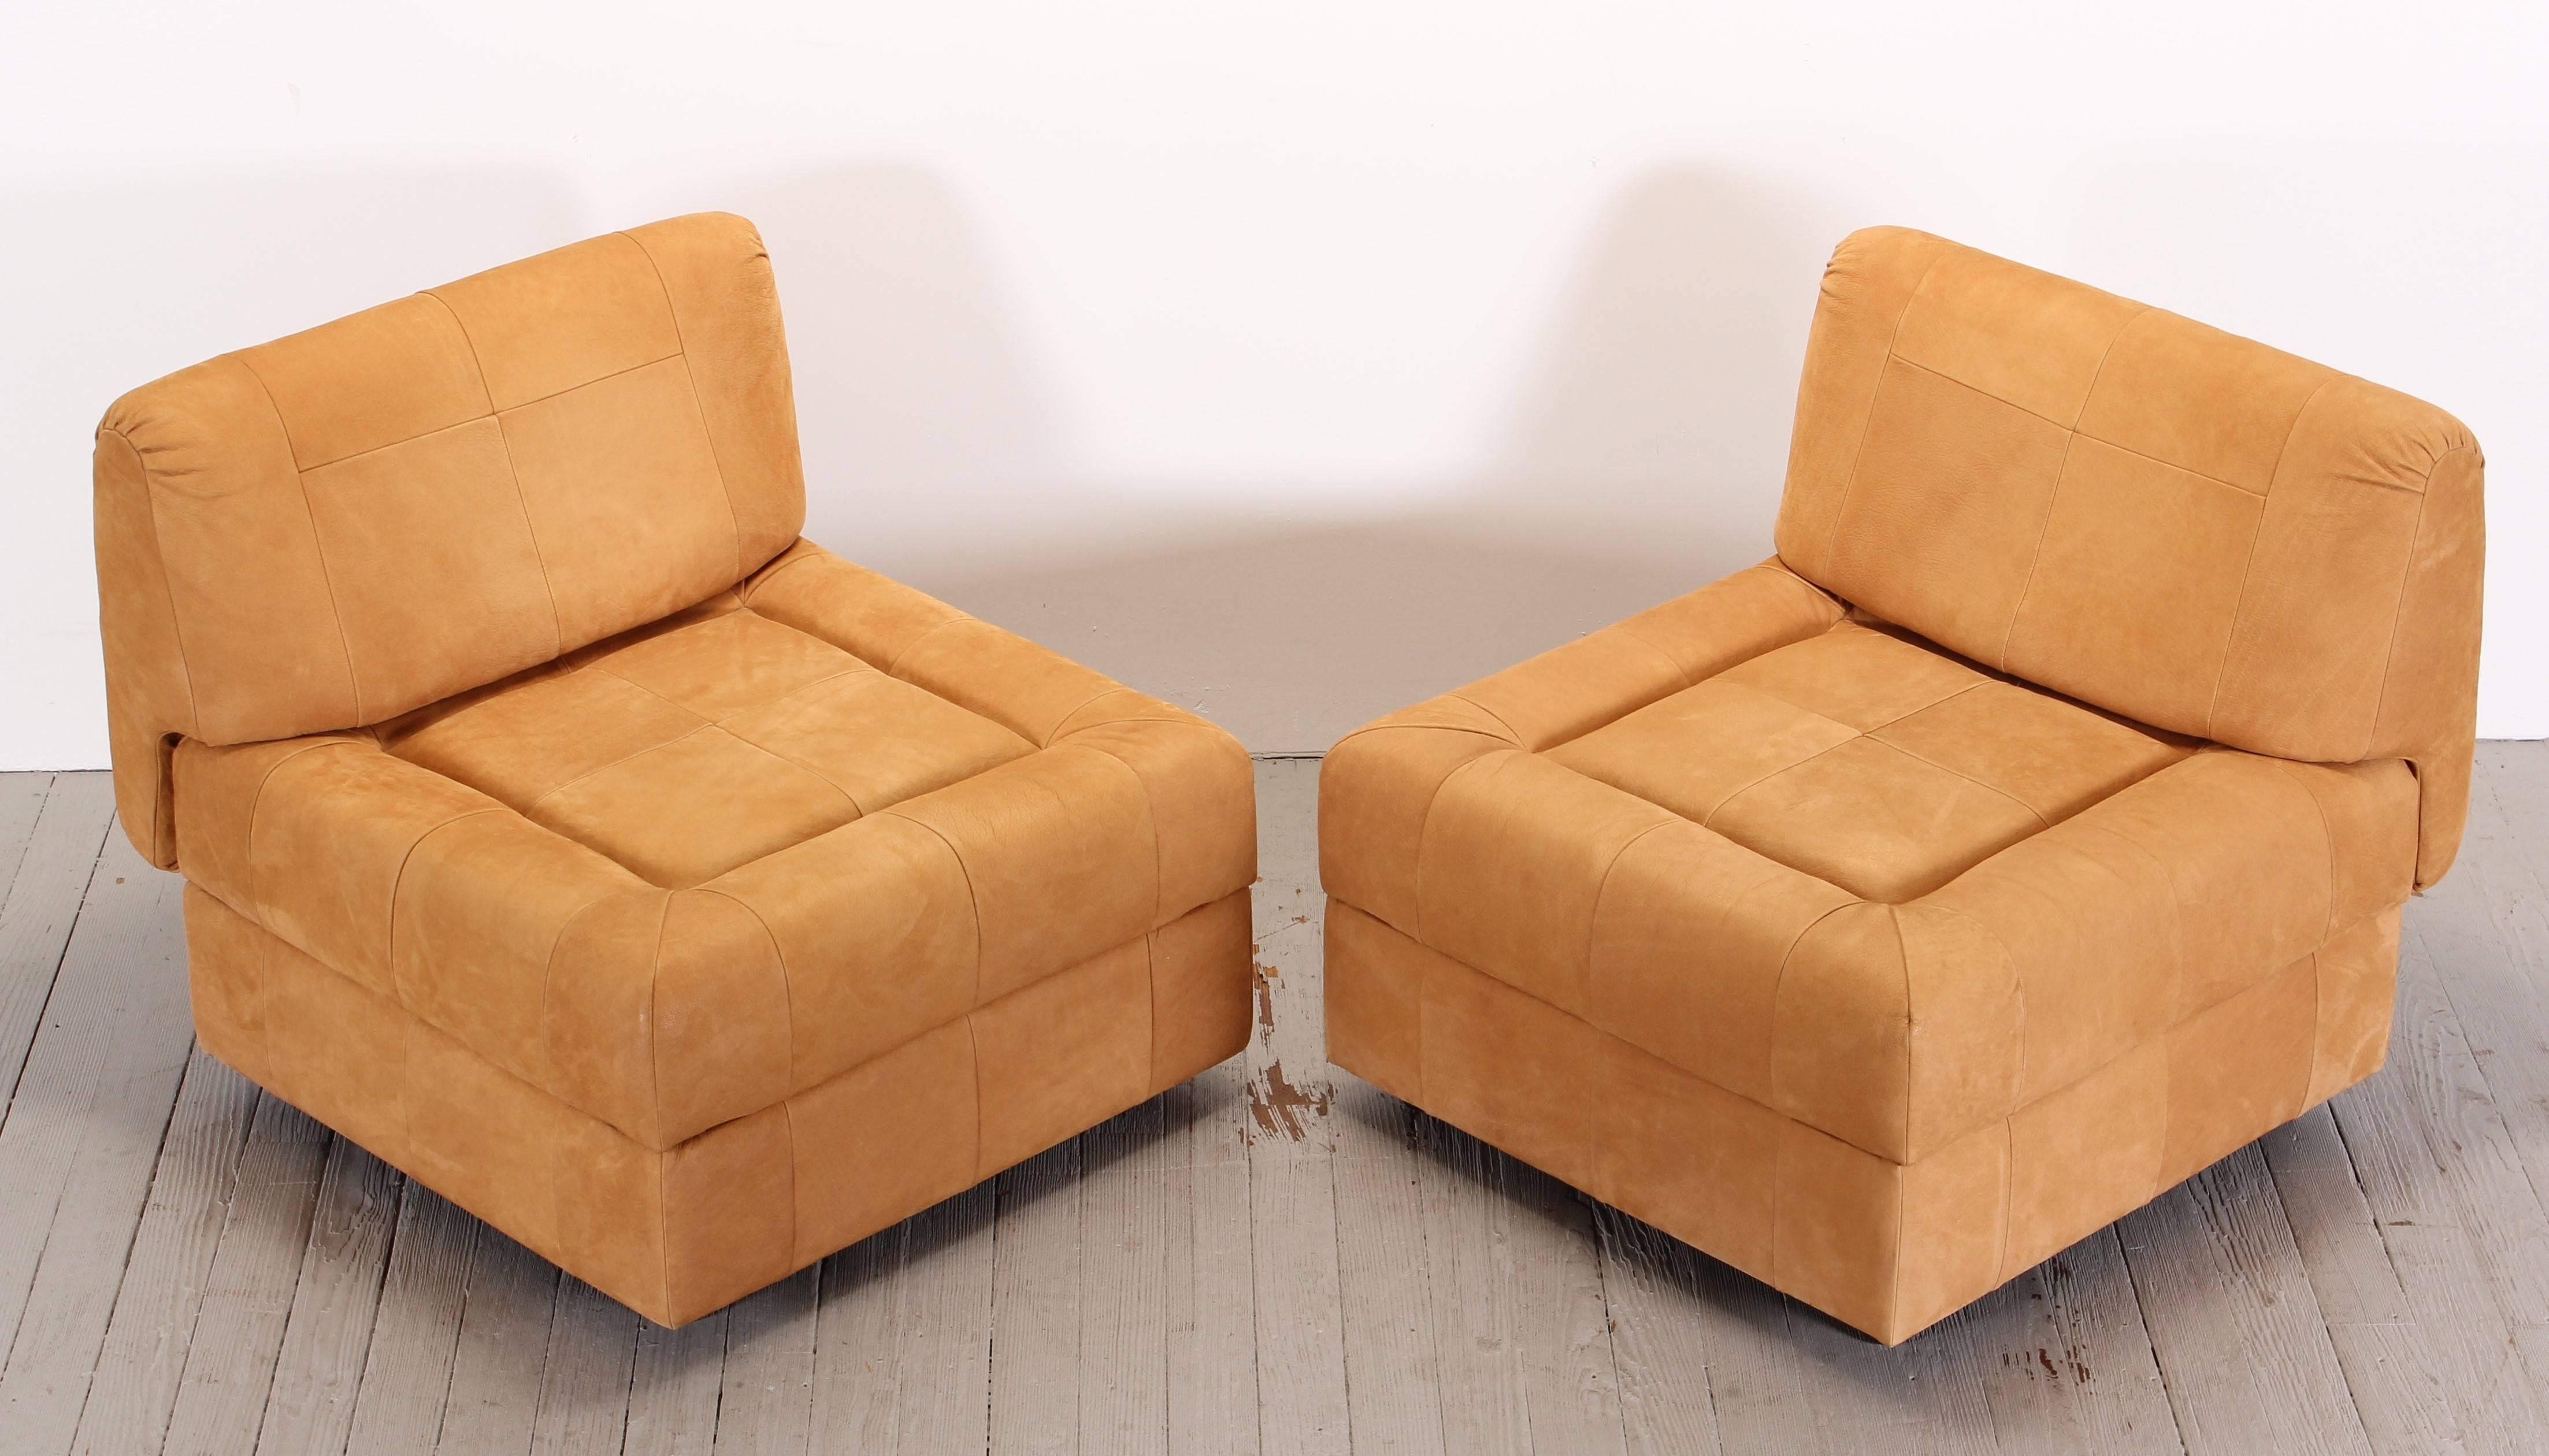 Brazilian Pair of Suede Leather Lounge Chairs by Lafer, 1970